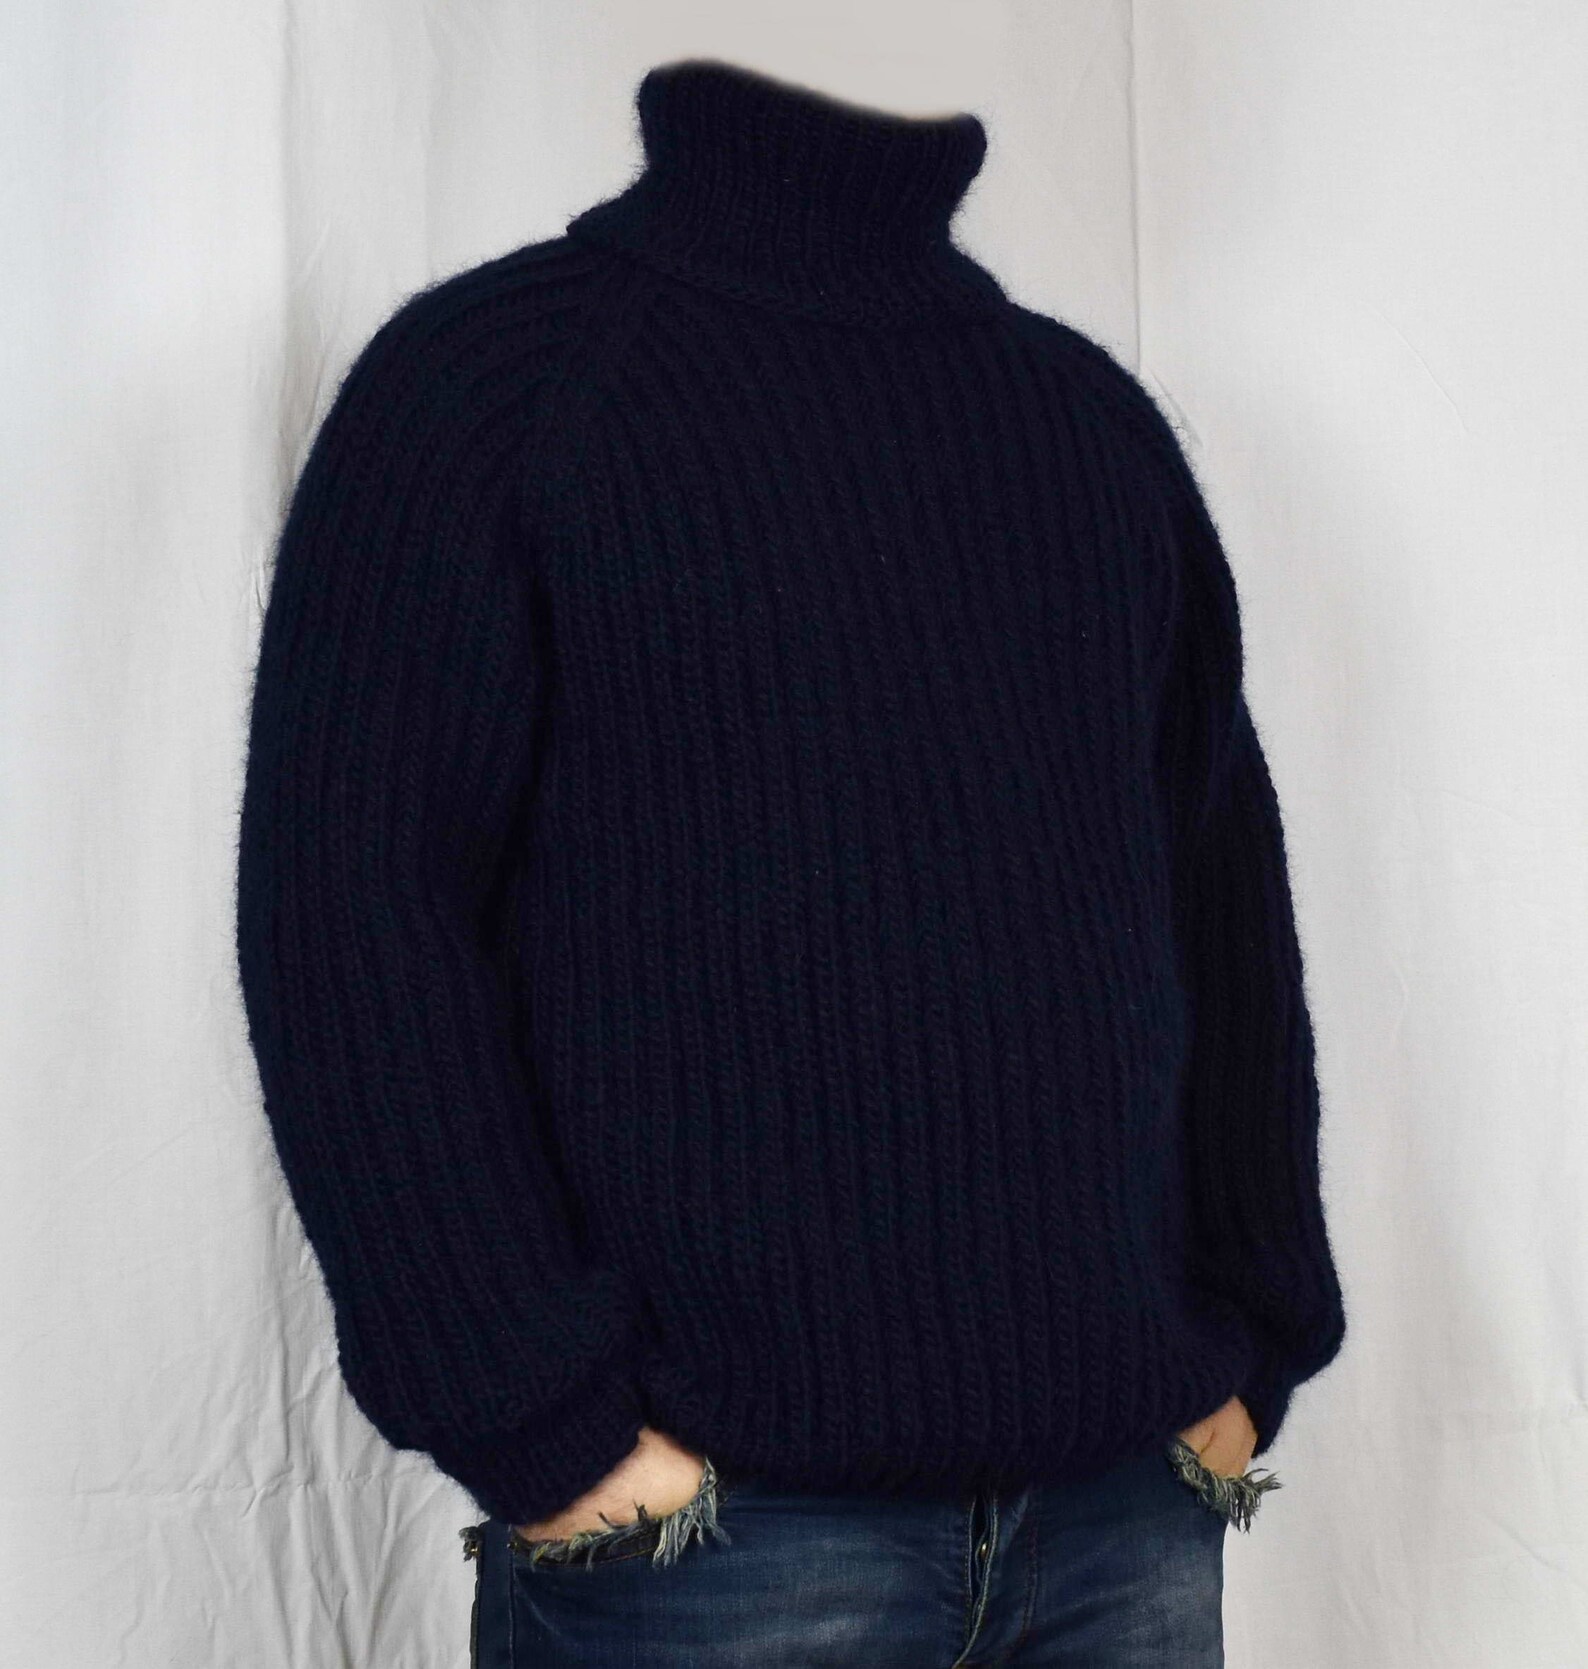 Hand Knitted 100% WOOL Mens Sweater With Turtleneck Woolen | Etsy